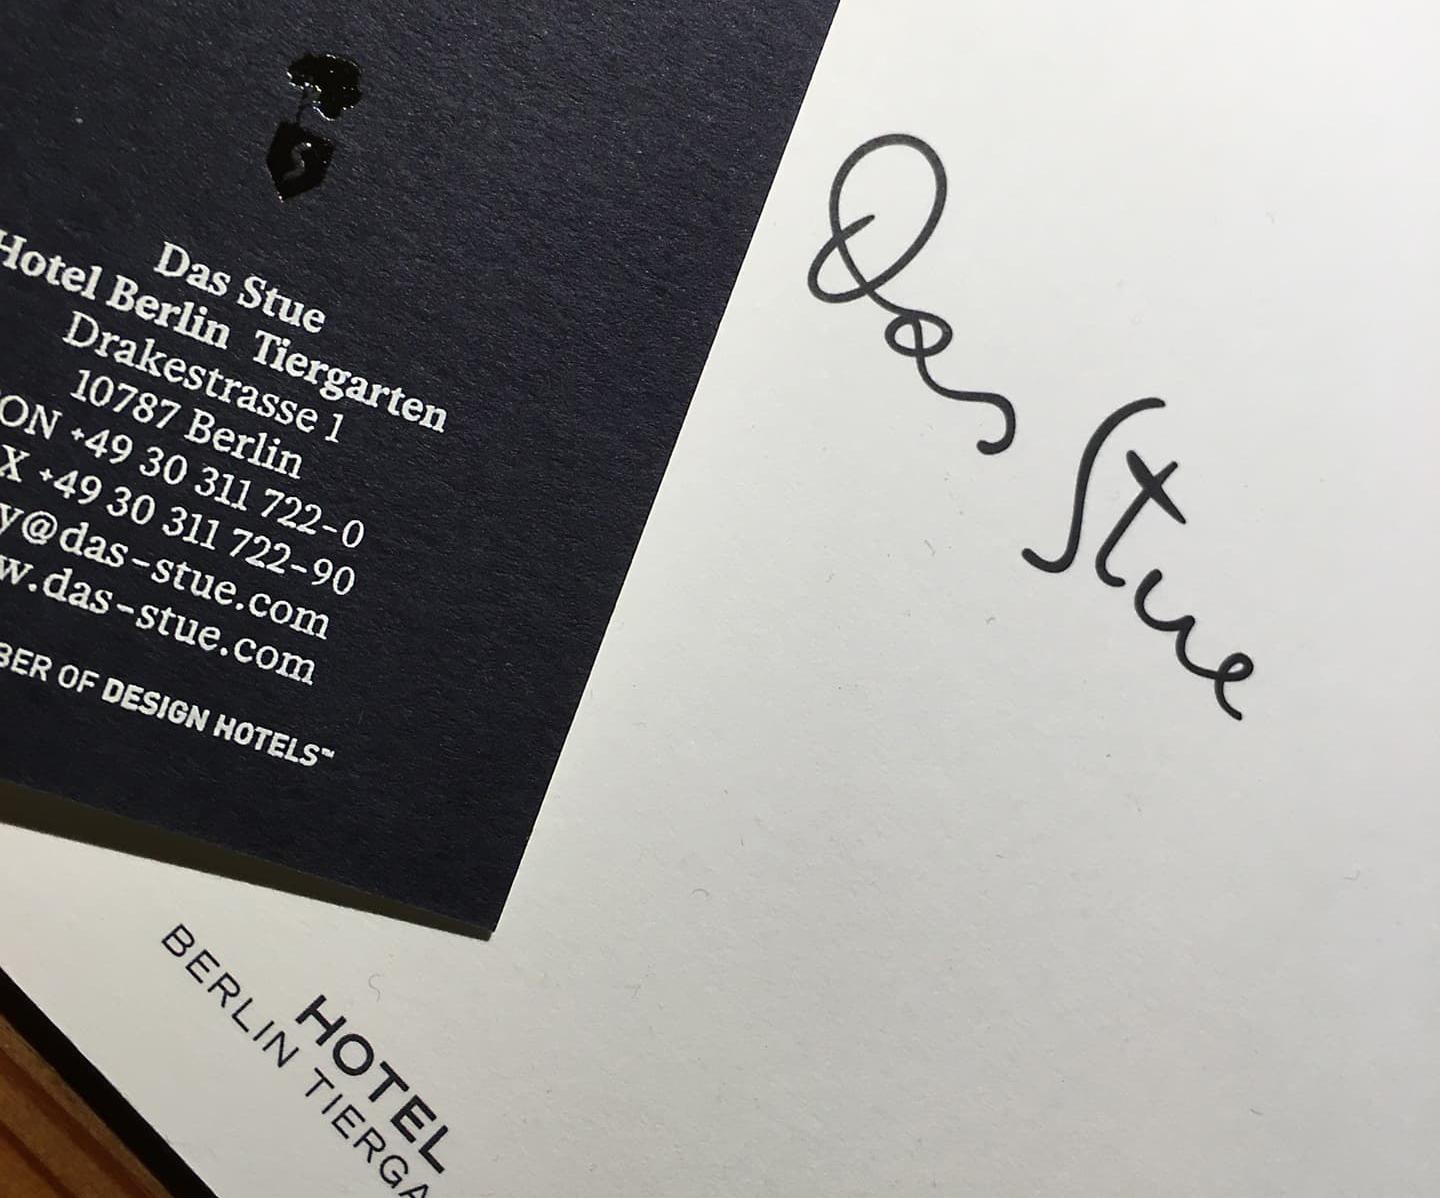 Mister K for Design Hotel “Das Stue” in Berlin, the stationary